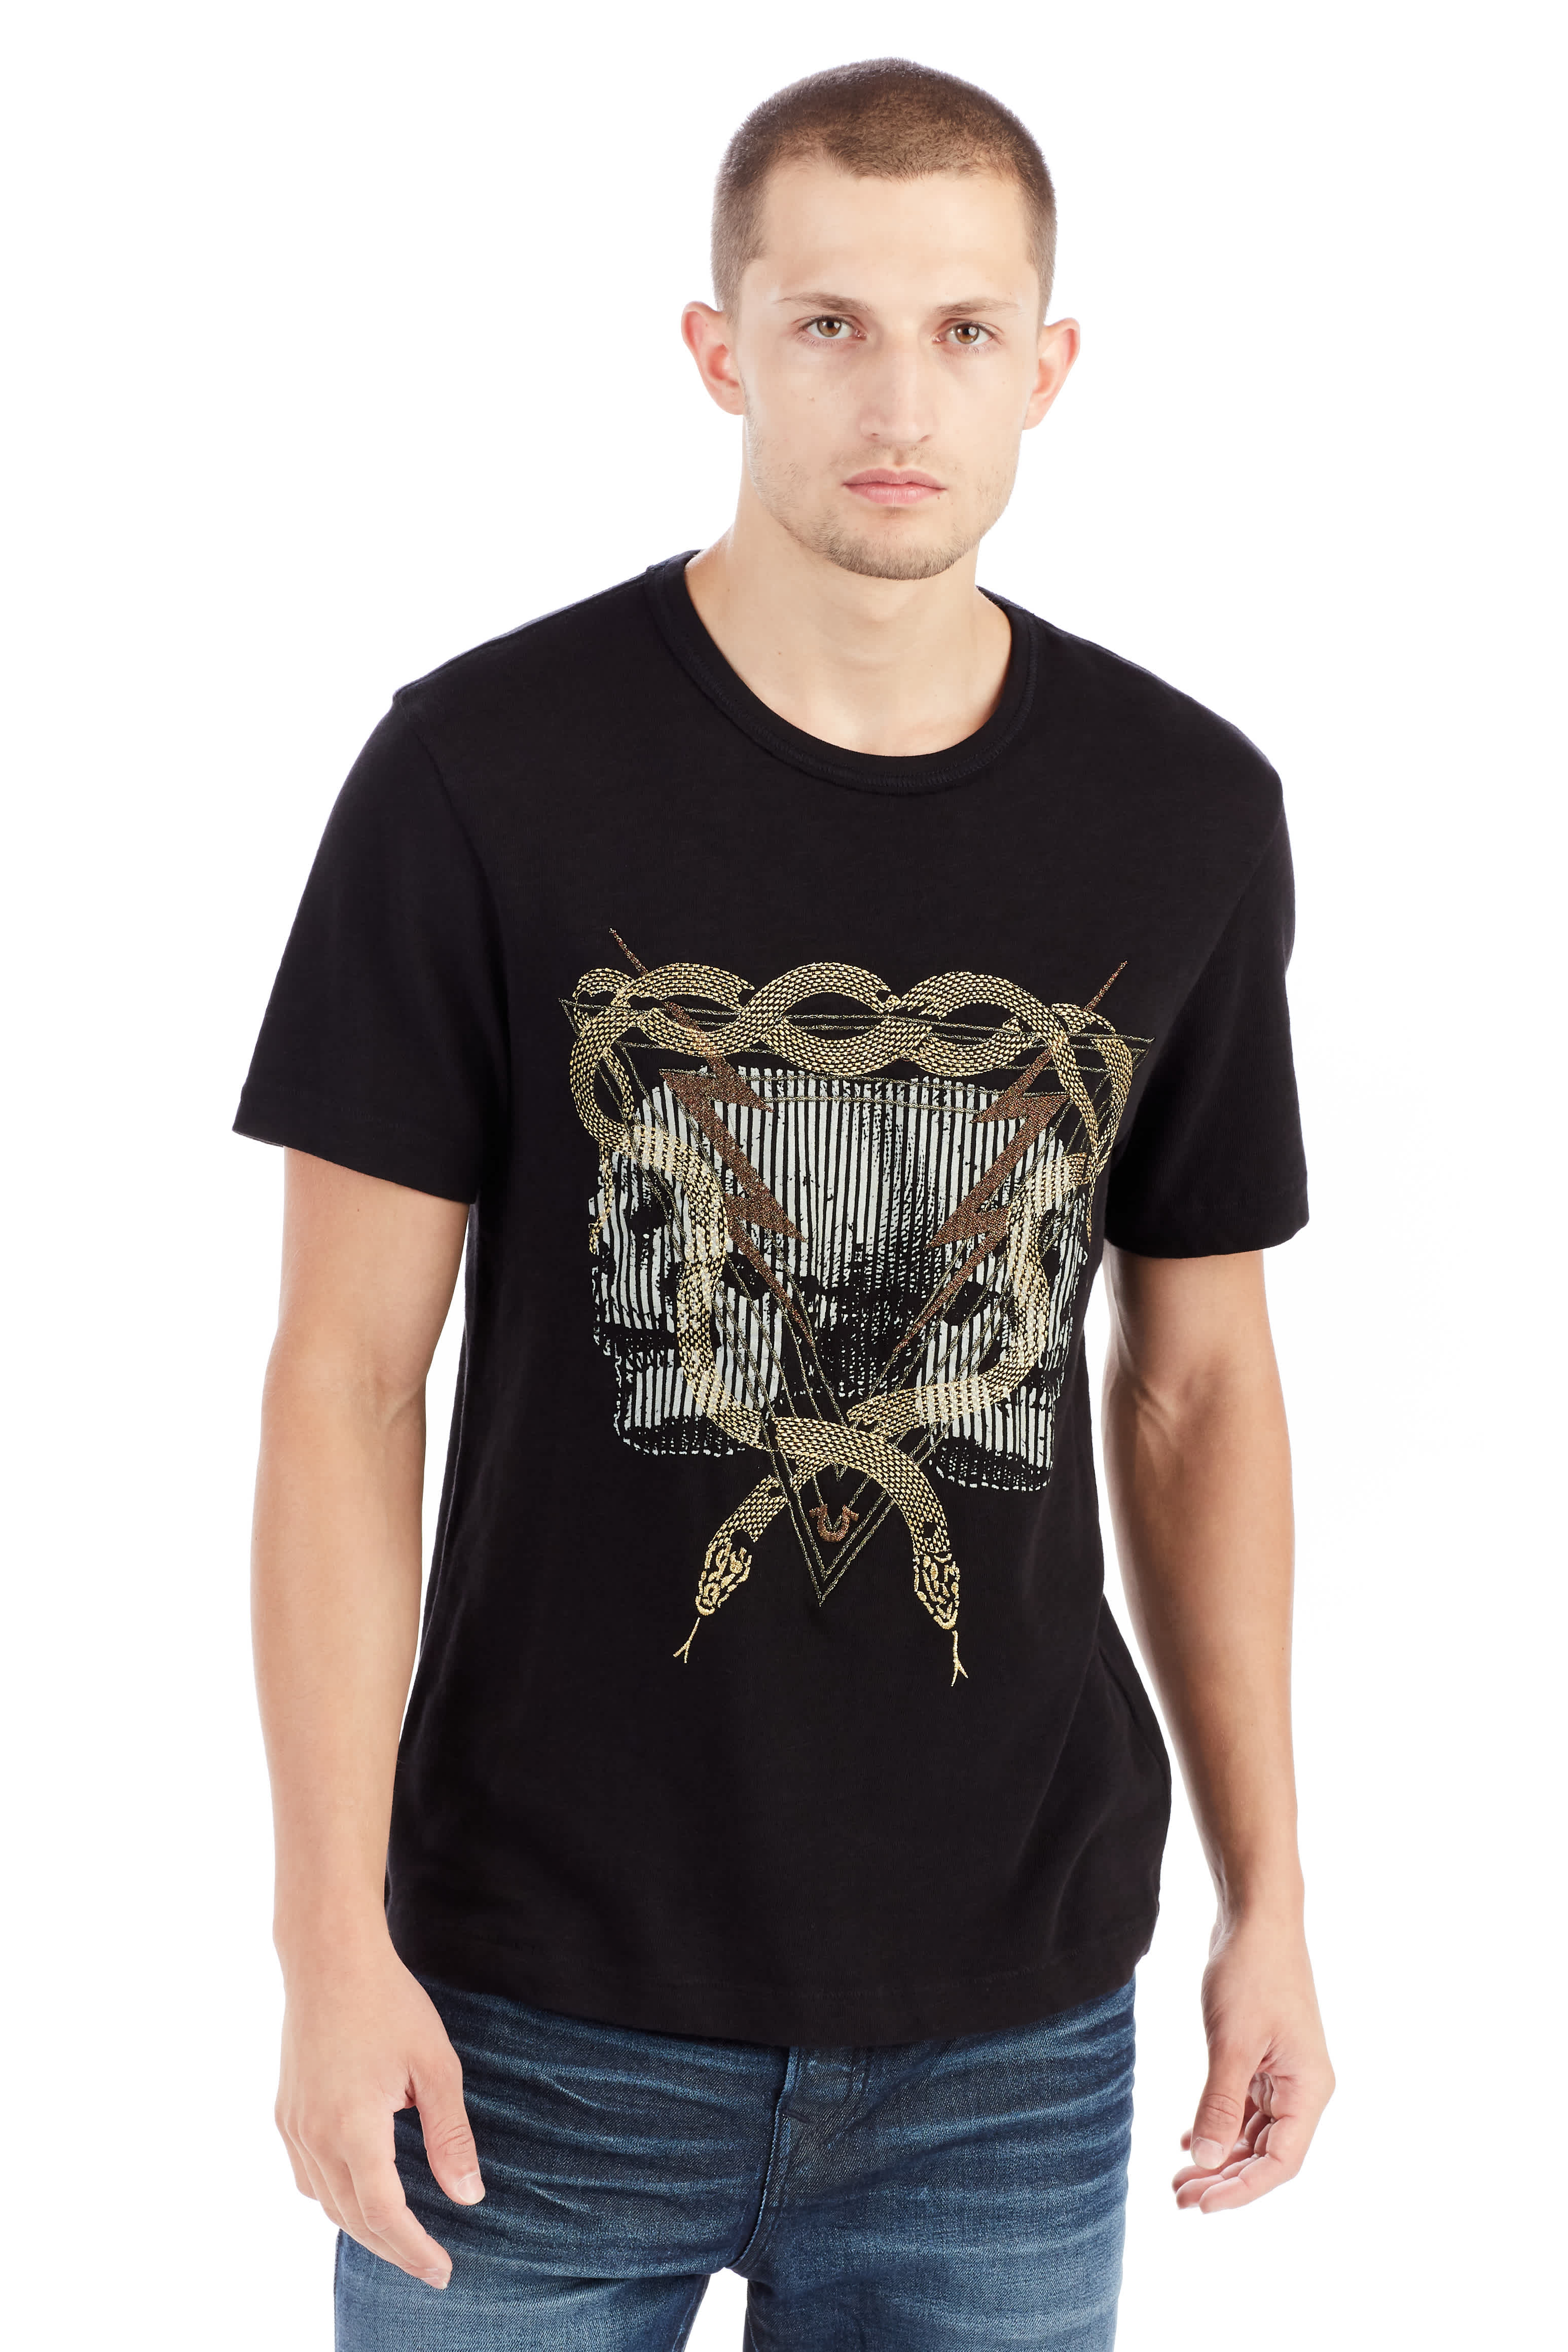 TWIN BOLT GRAPHIC MENS TEE